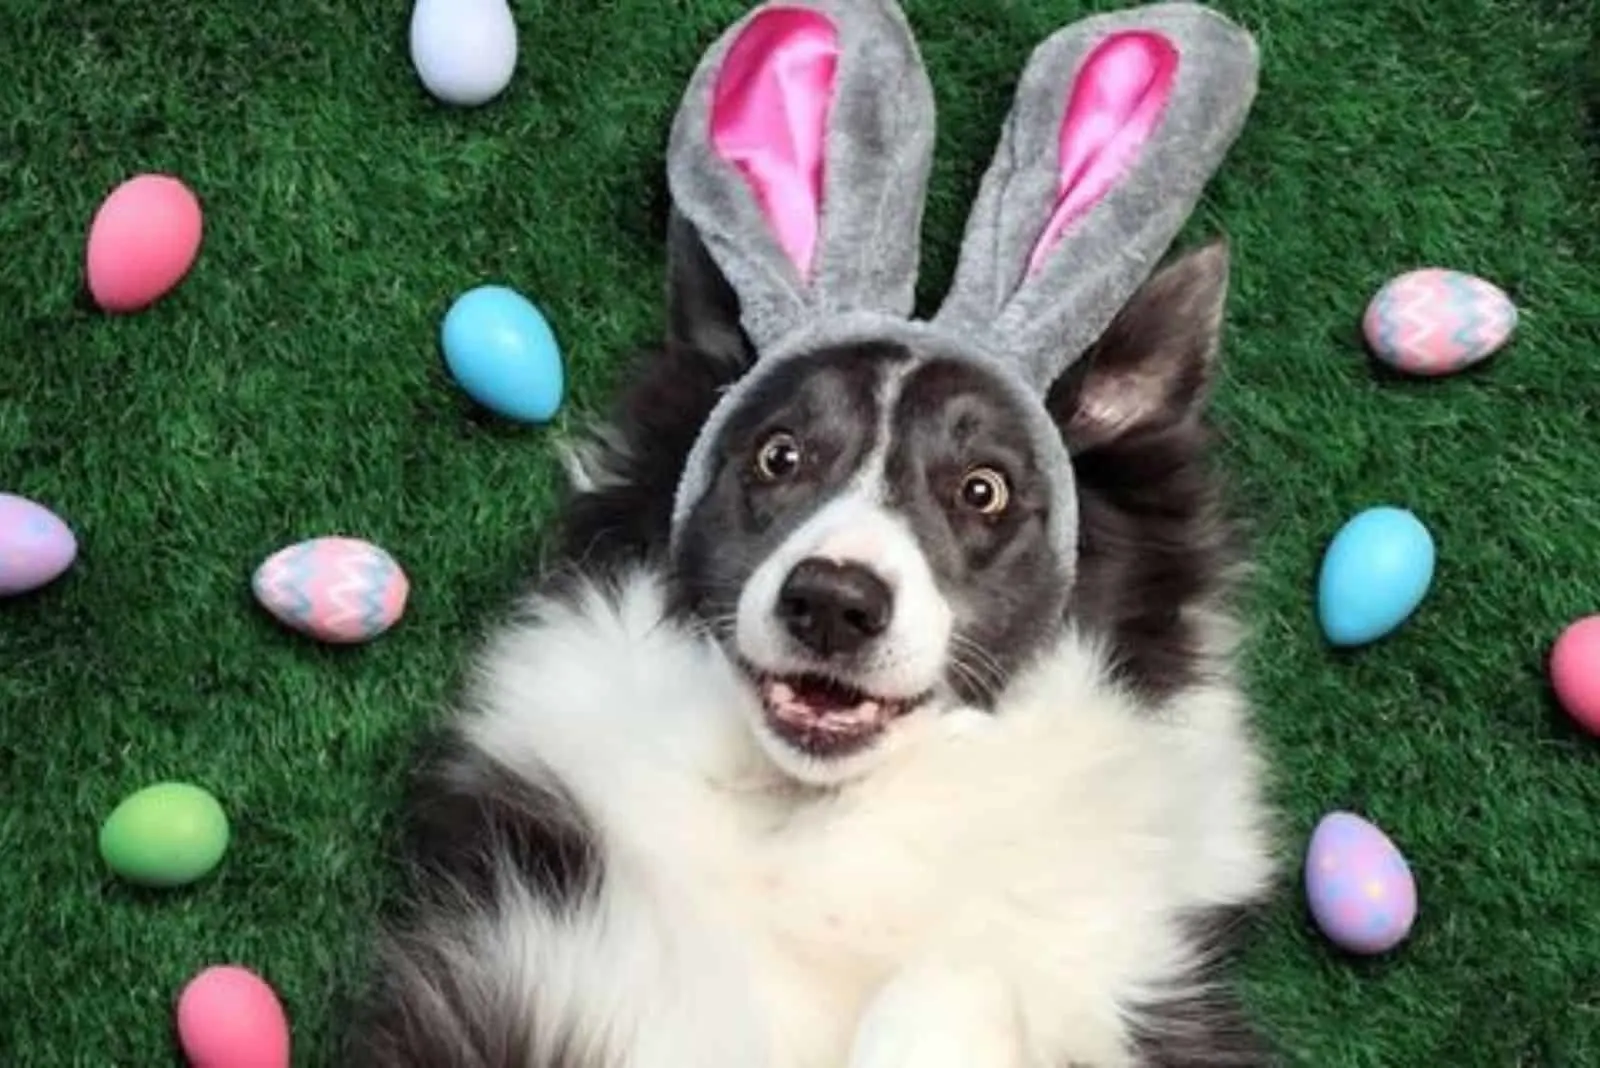 dog wearing bunny ears lying on the grass surrounded with easter eggs